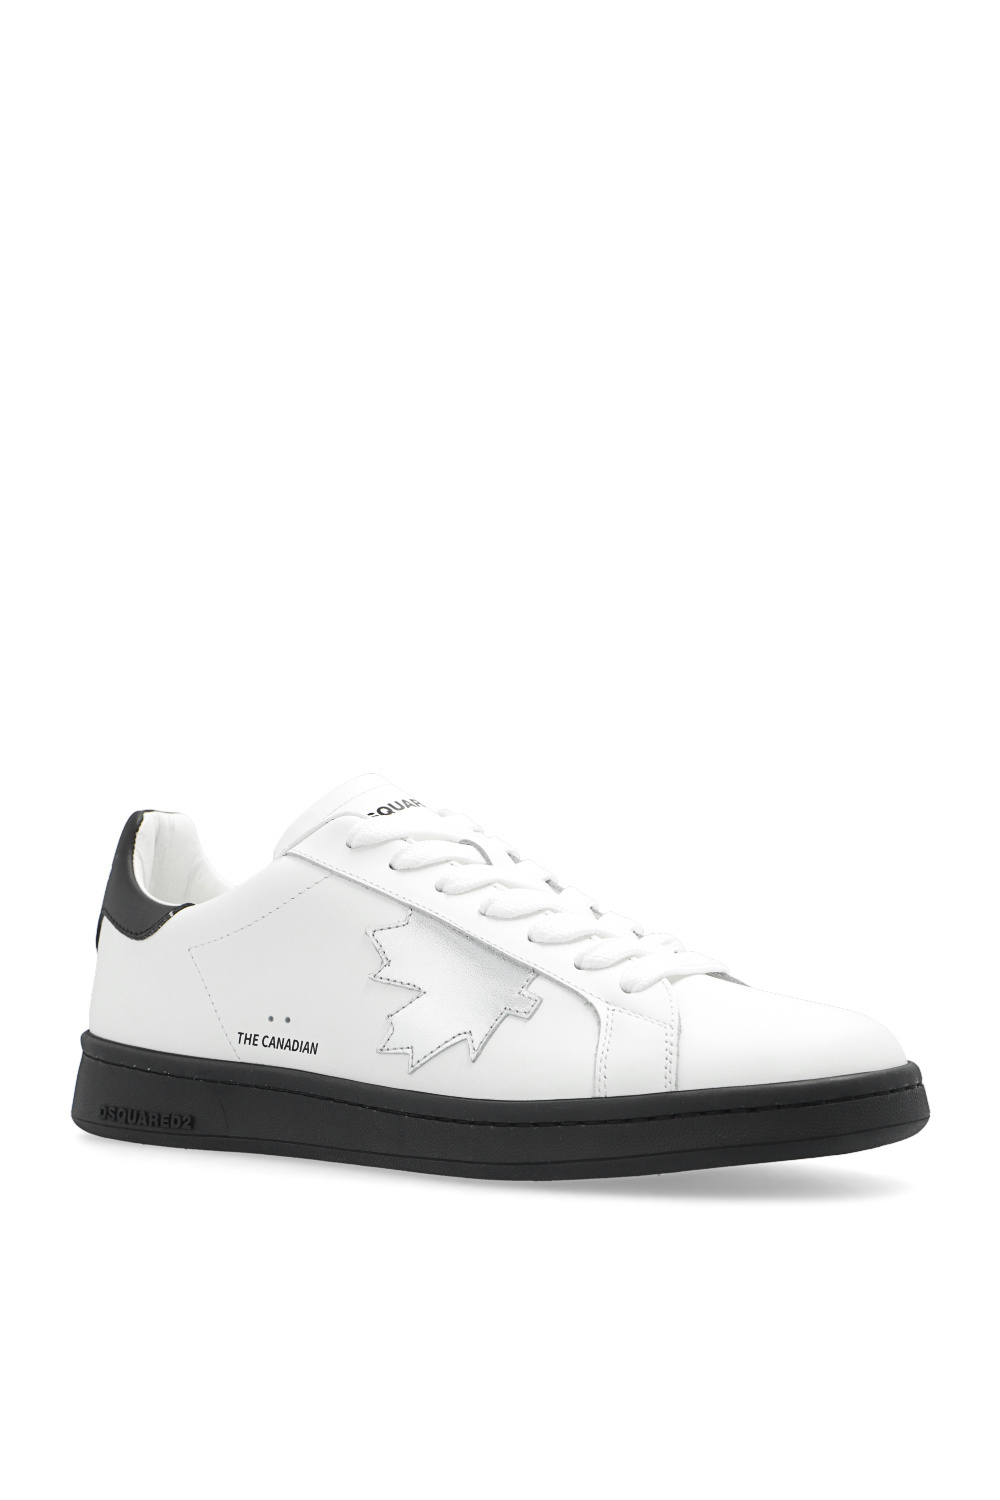 Dsquared2 ‘Boxer’ sneakers